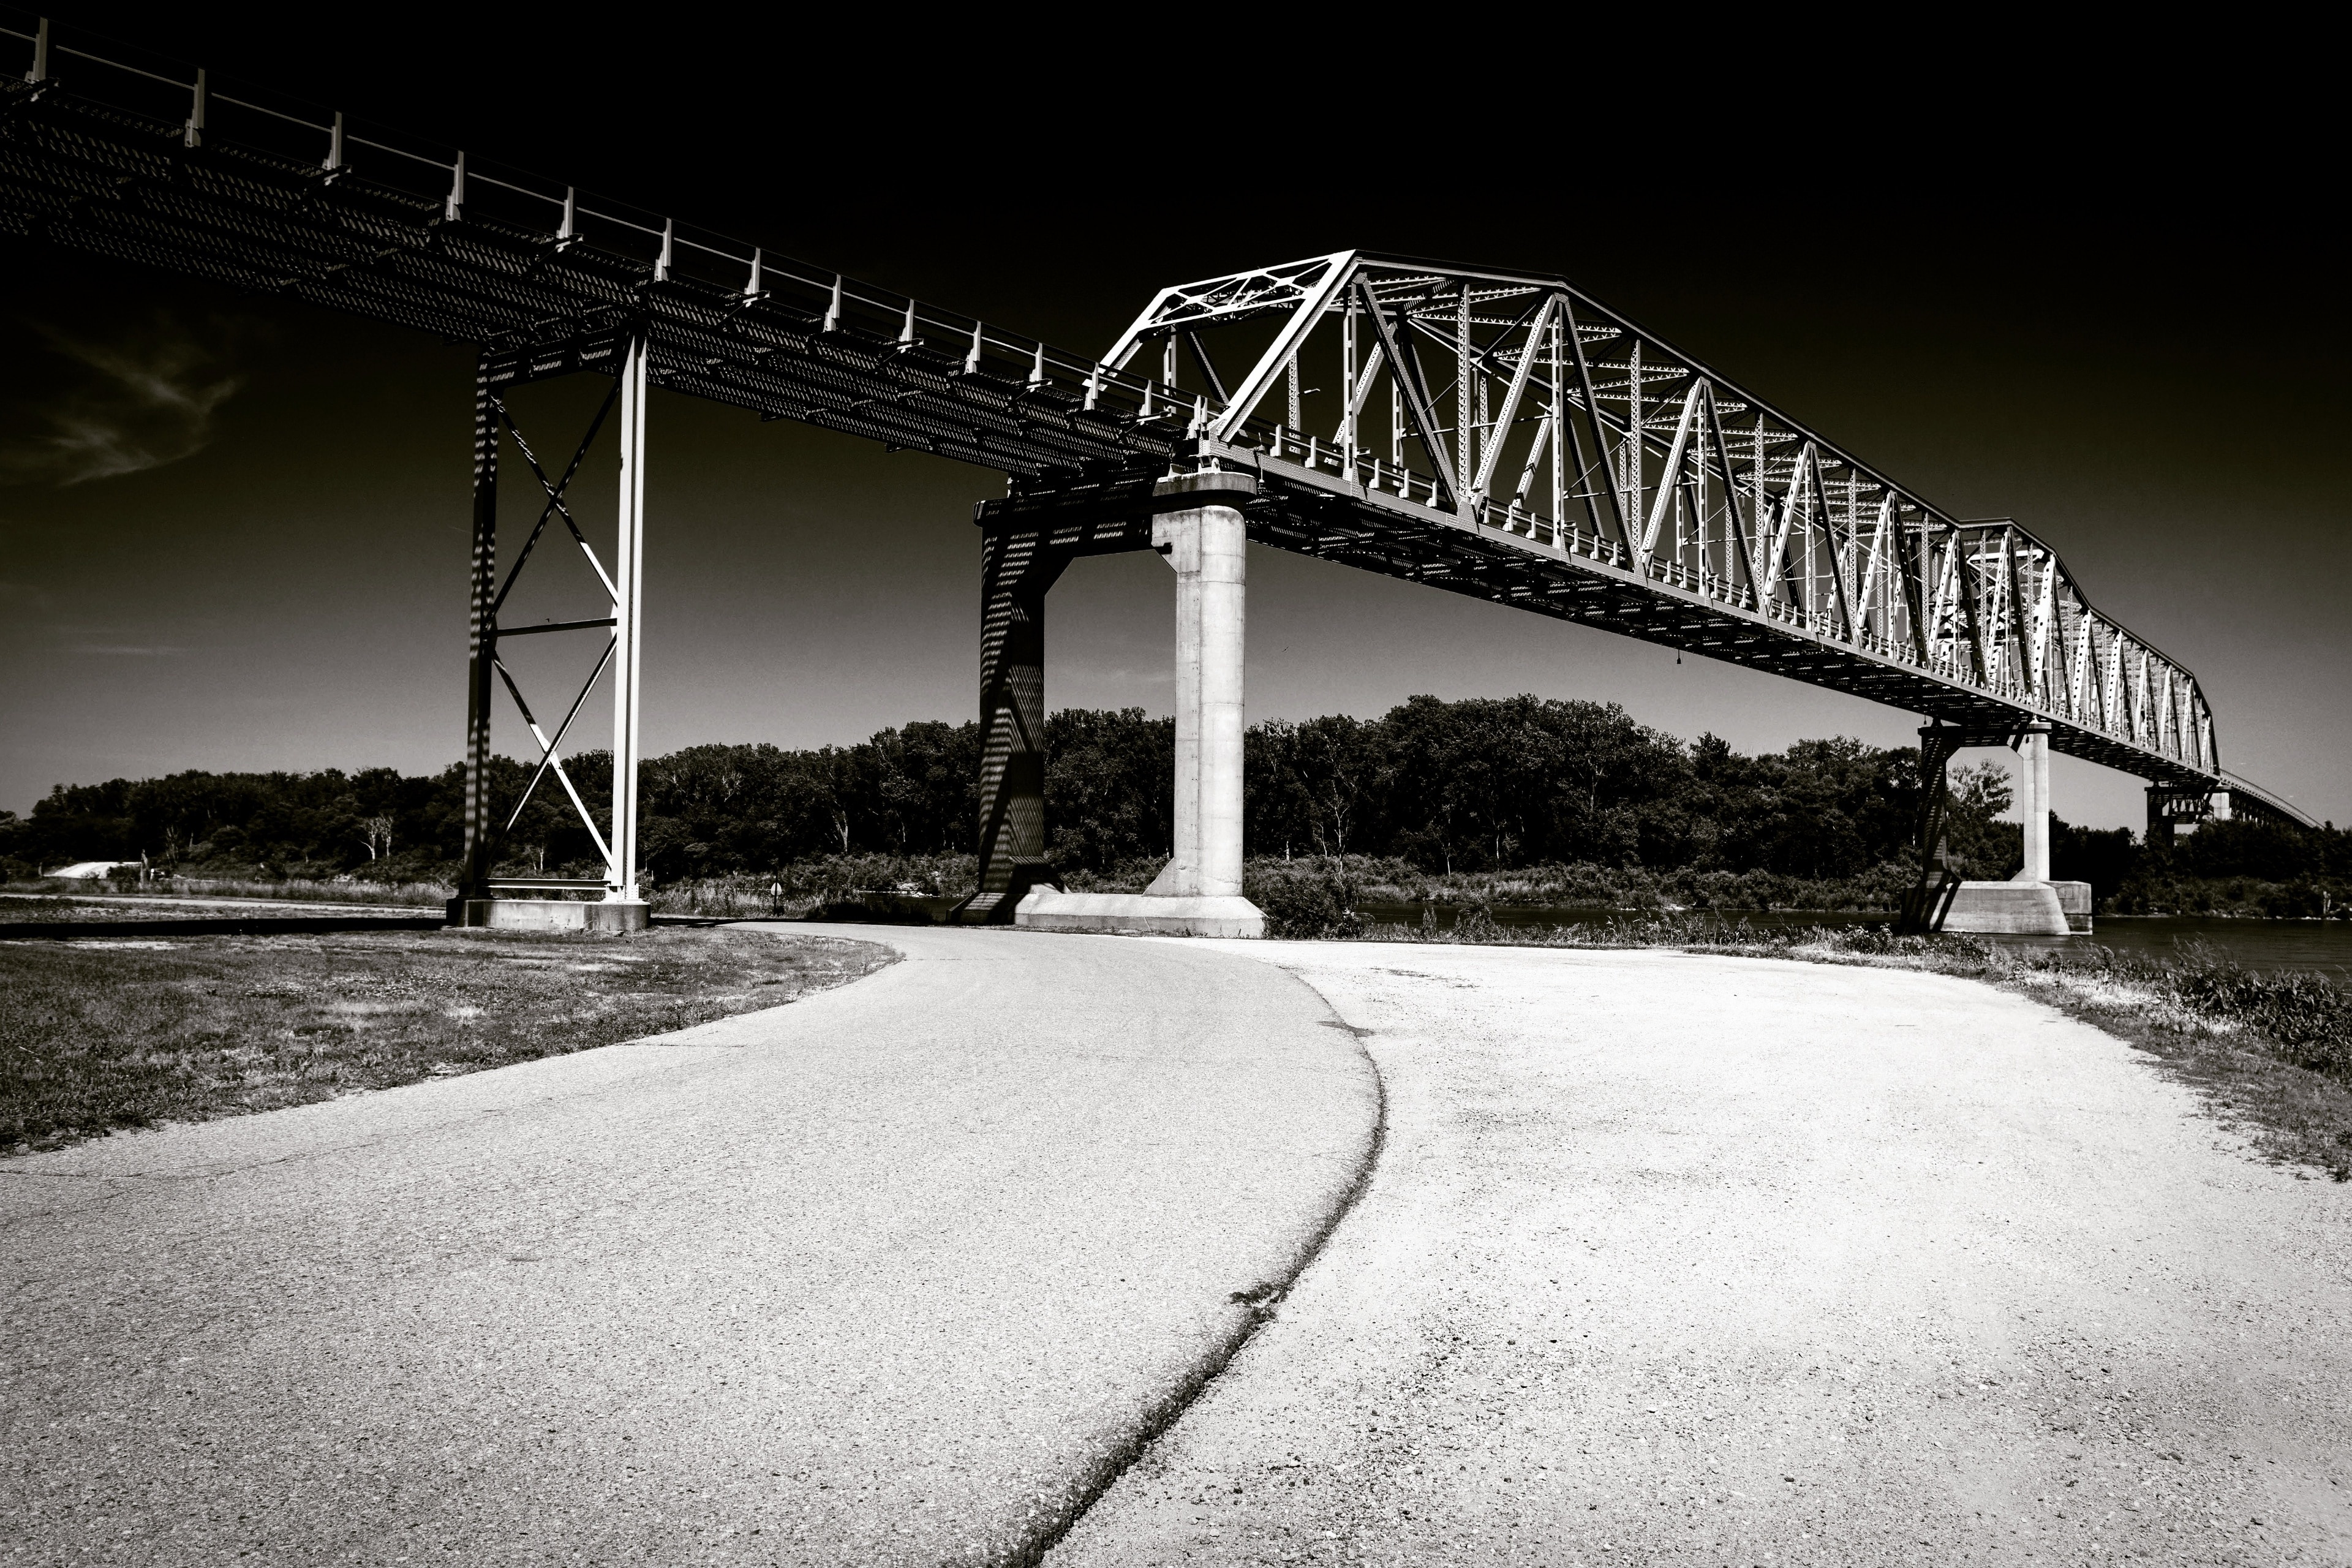 The Burt County Bridge connects Nebraska to Iowa by crossing the Missouri River.
It is a lonely region that can offer amazing sunsets and sudden storms.
#OnTheRoad
